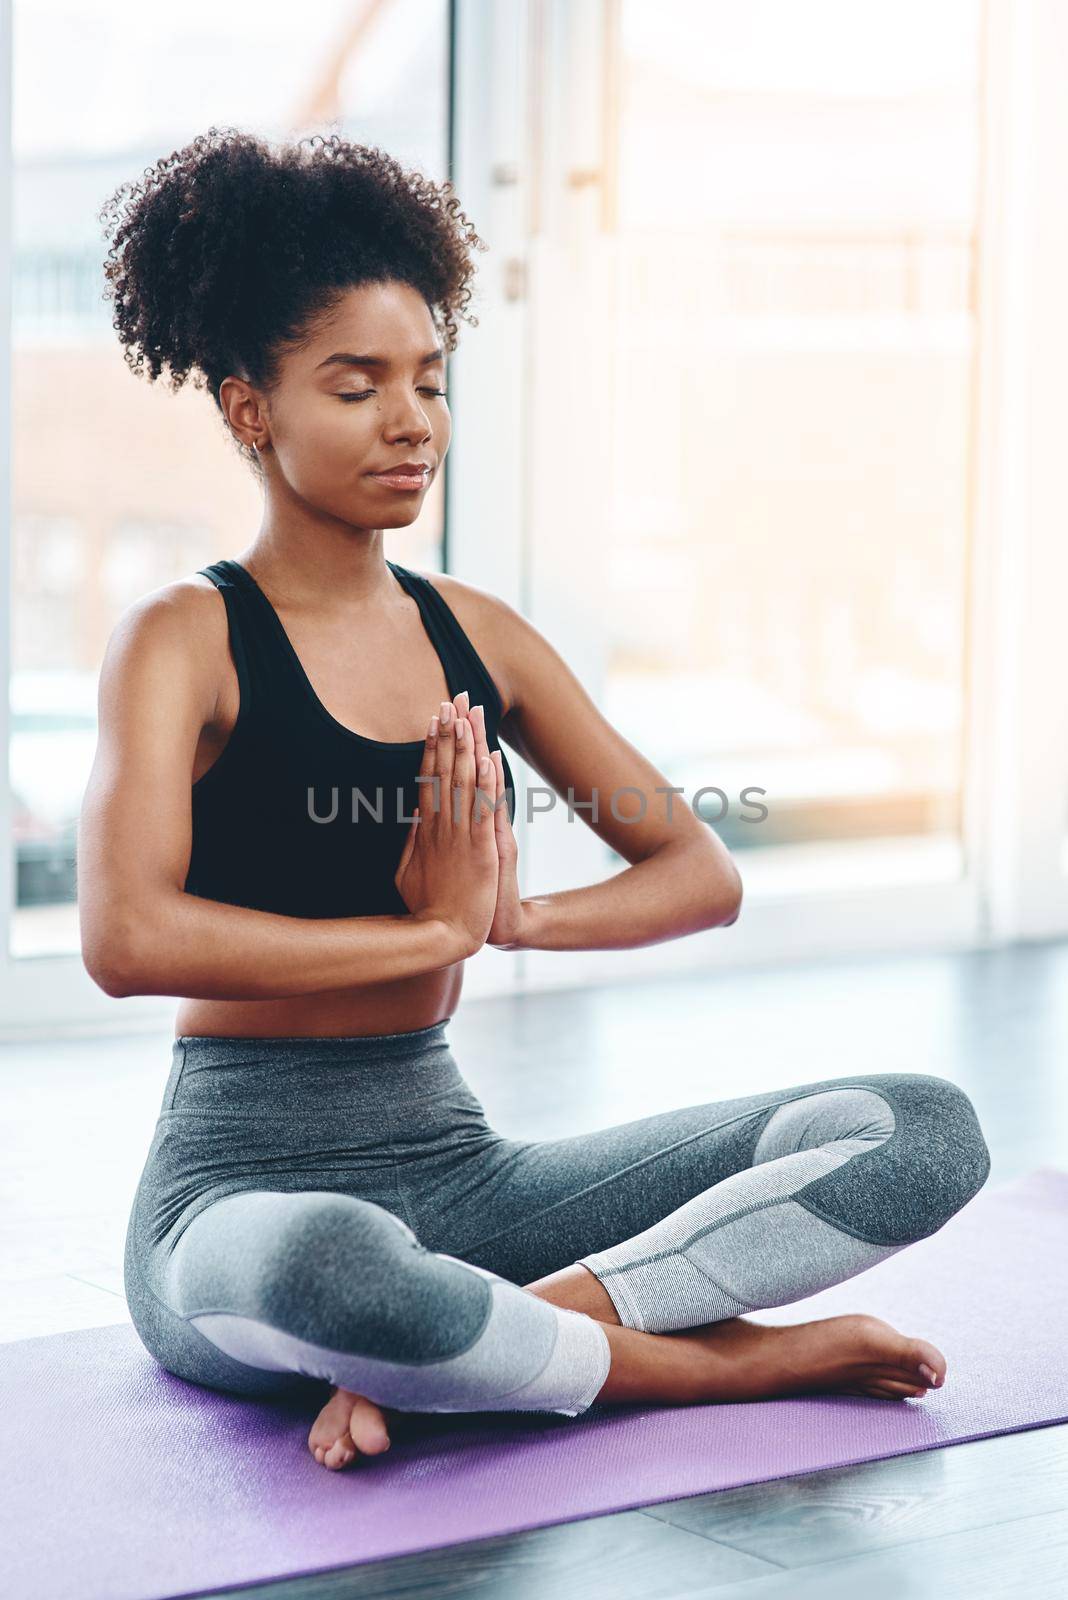 Yoga is the best exercise there is. a beautiful young woman practising yoga in a studio